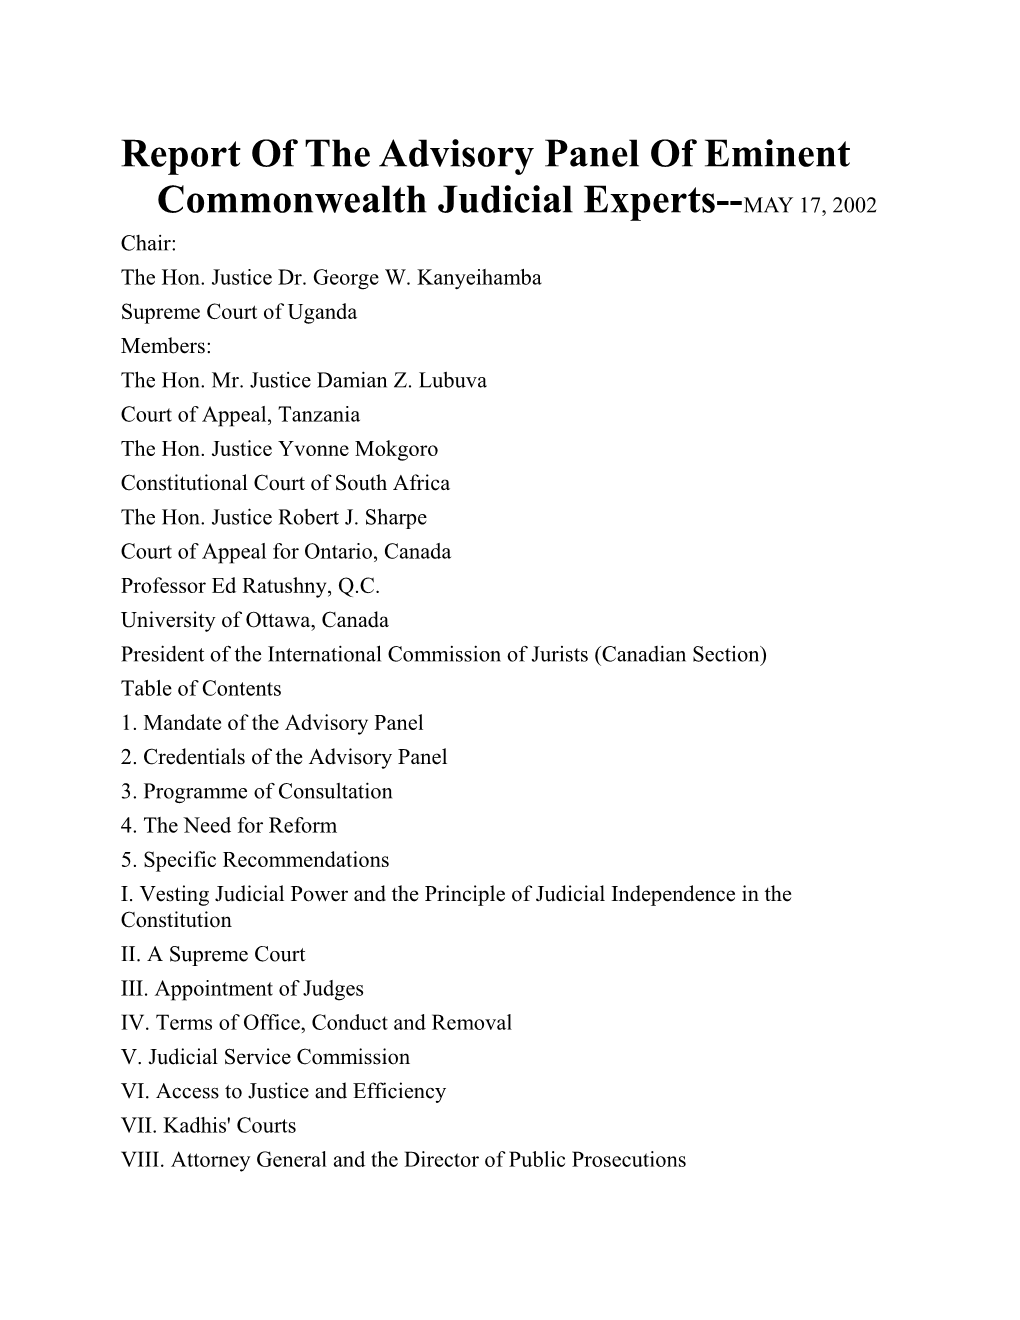 Report of the Advisory Panel of Eminent Commonwealth Judicial Experts MAY 17, 2002